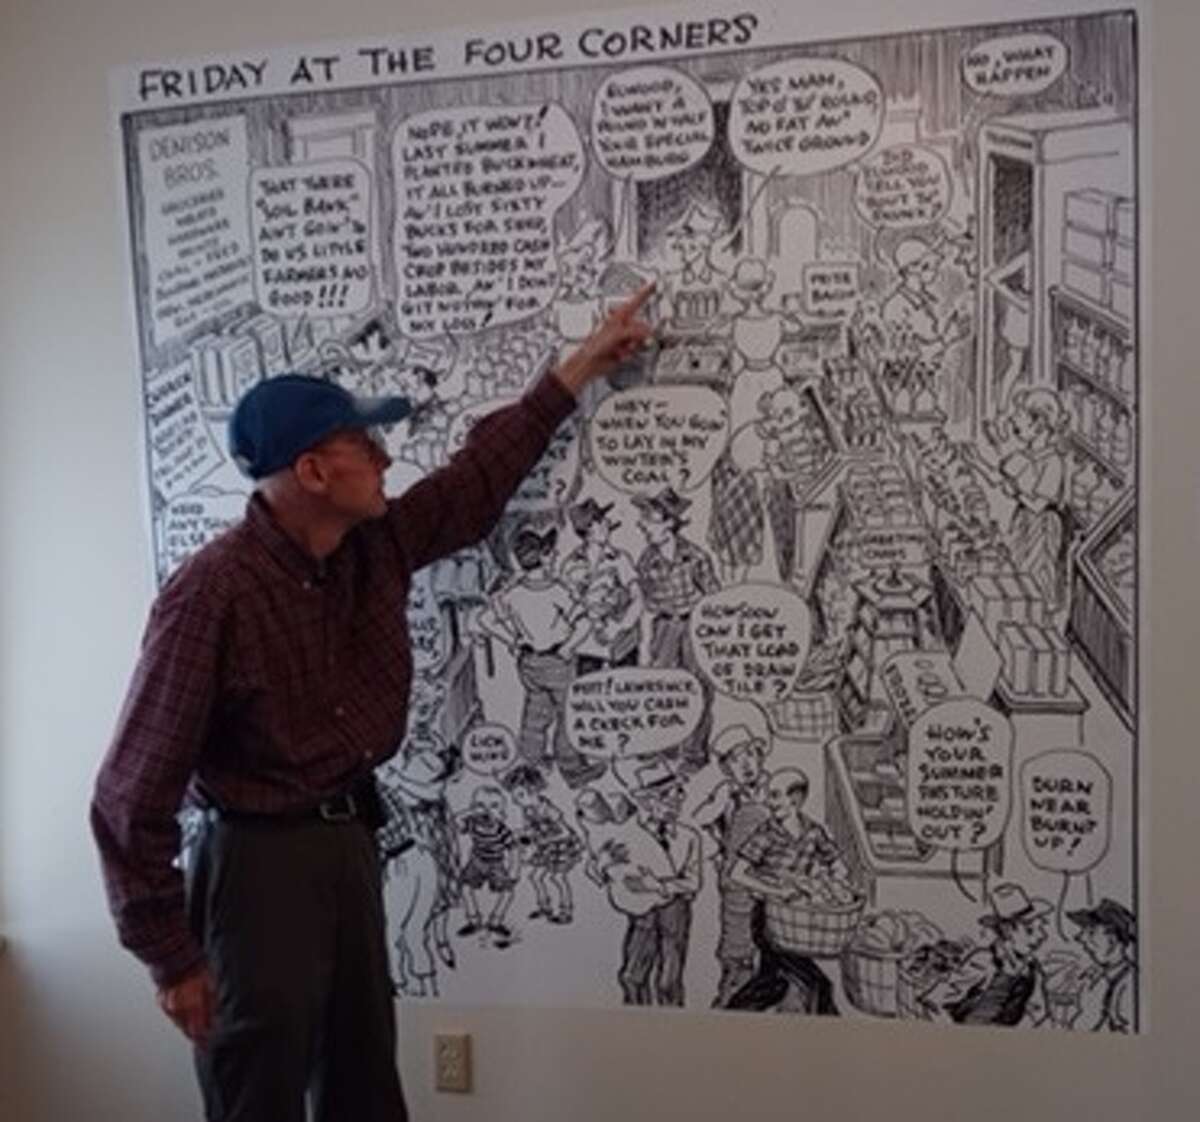 During a visit to the museum, Jim Denison, born in 1949, recognized his father, as well as a few other friends and family, in an enlarged cartoon entitled “Friday at the Four Corners” at a Brookside Museum exhibit.